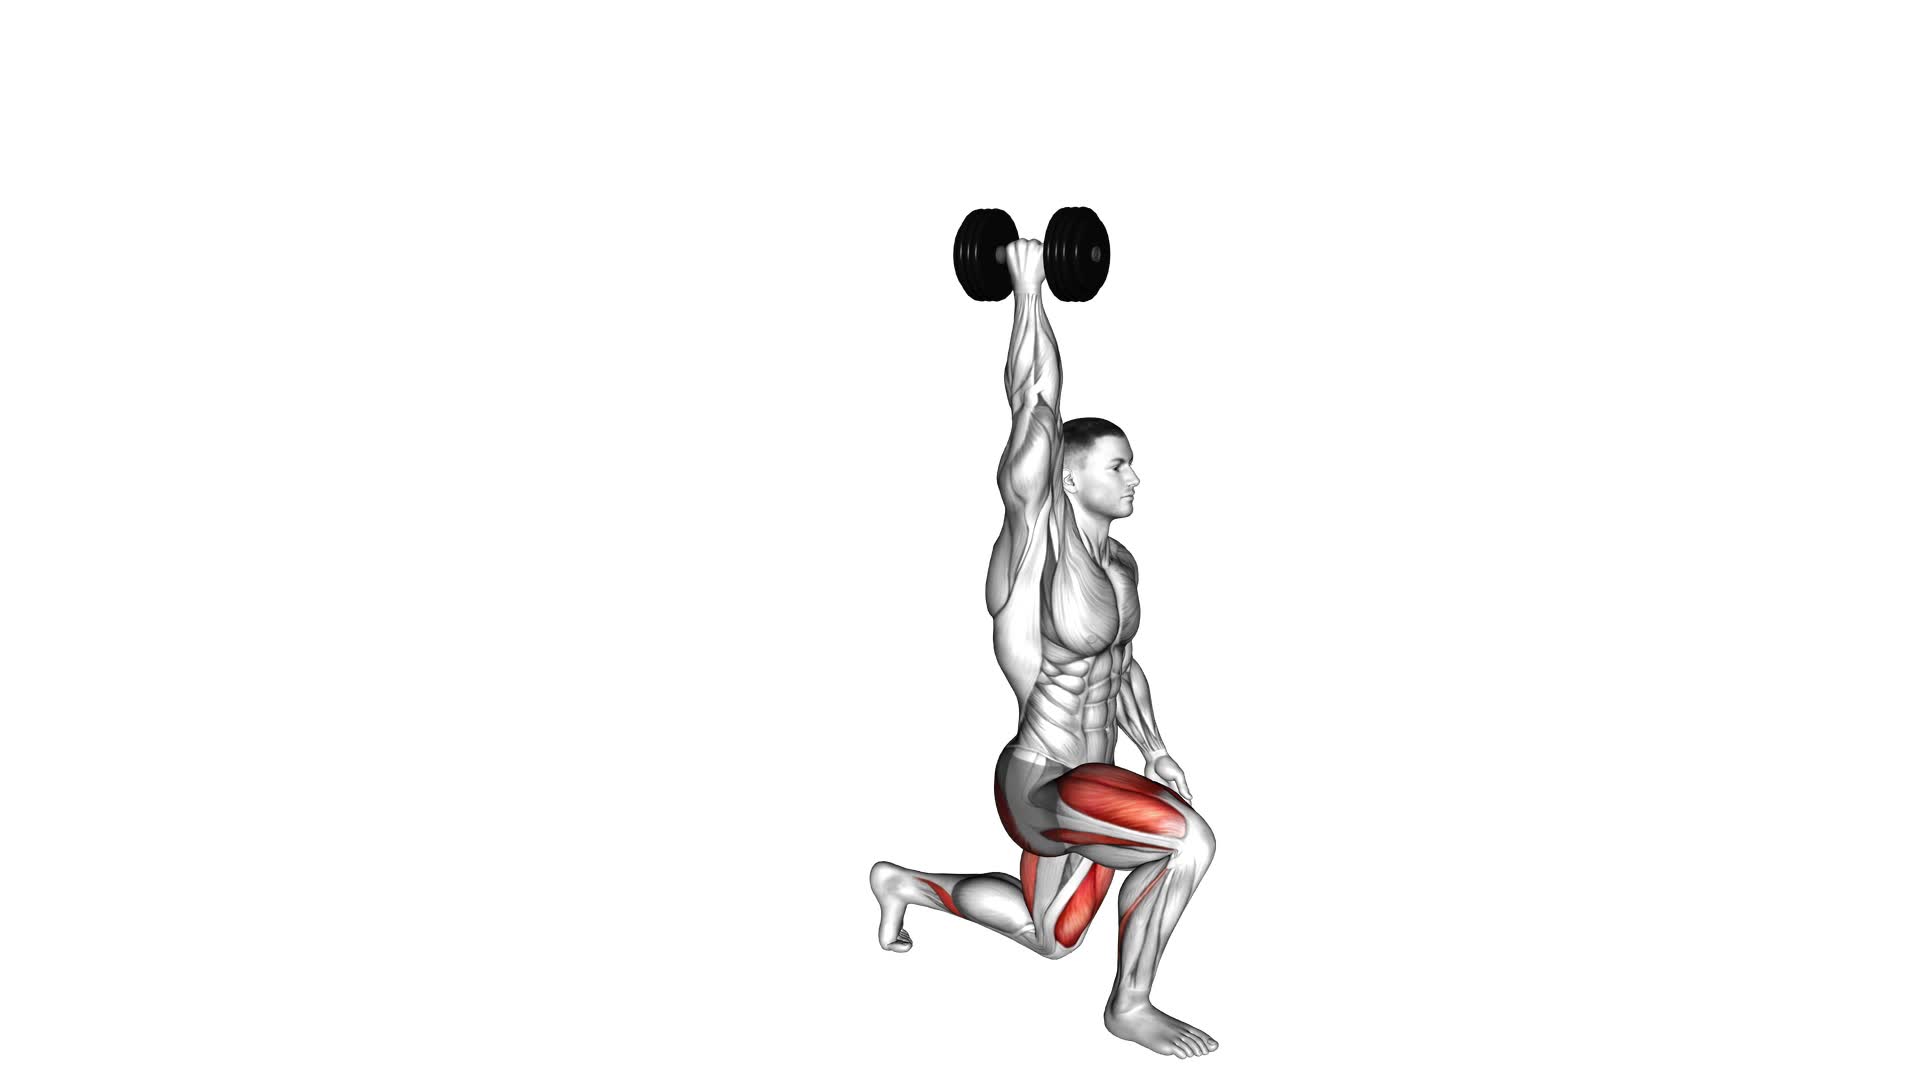 Dumbbell Single Arm Overhead Lunge - Video Exercise Guide & Tips